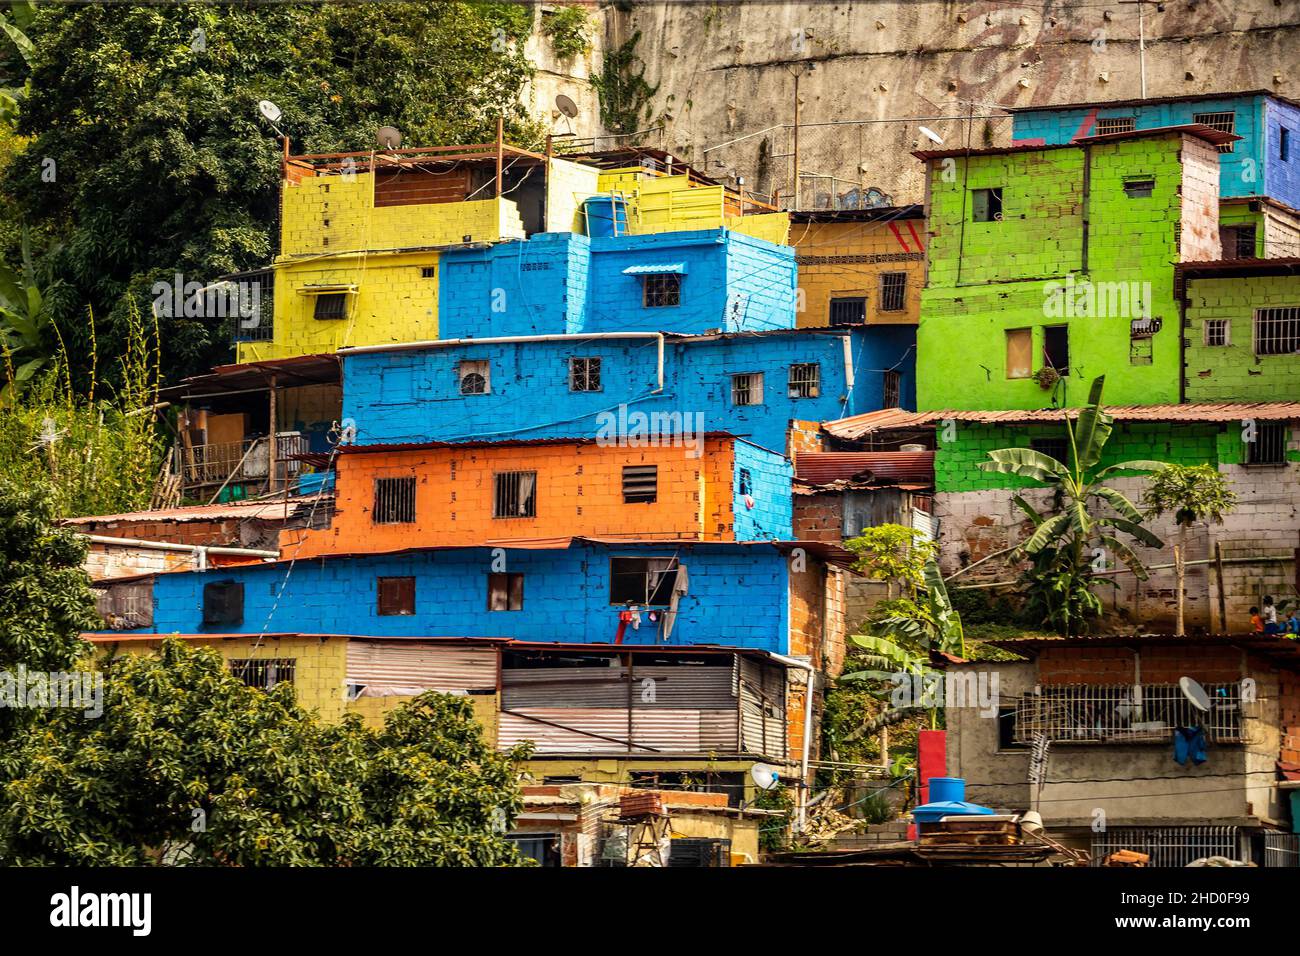 Colorful residential buildings in Caracas Venezuela capital on the hill Stock Photo